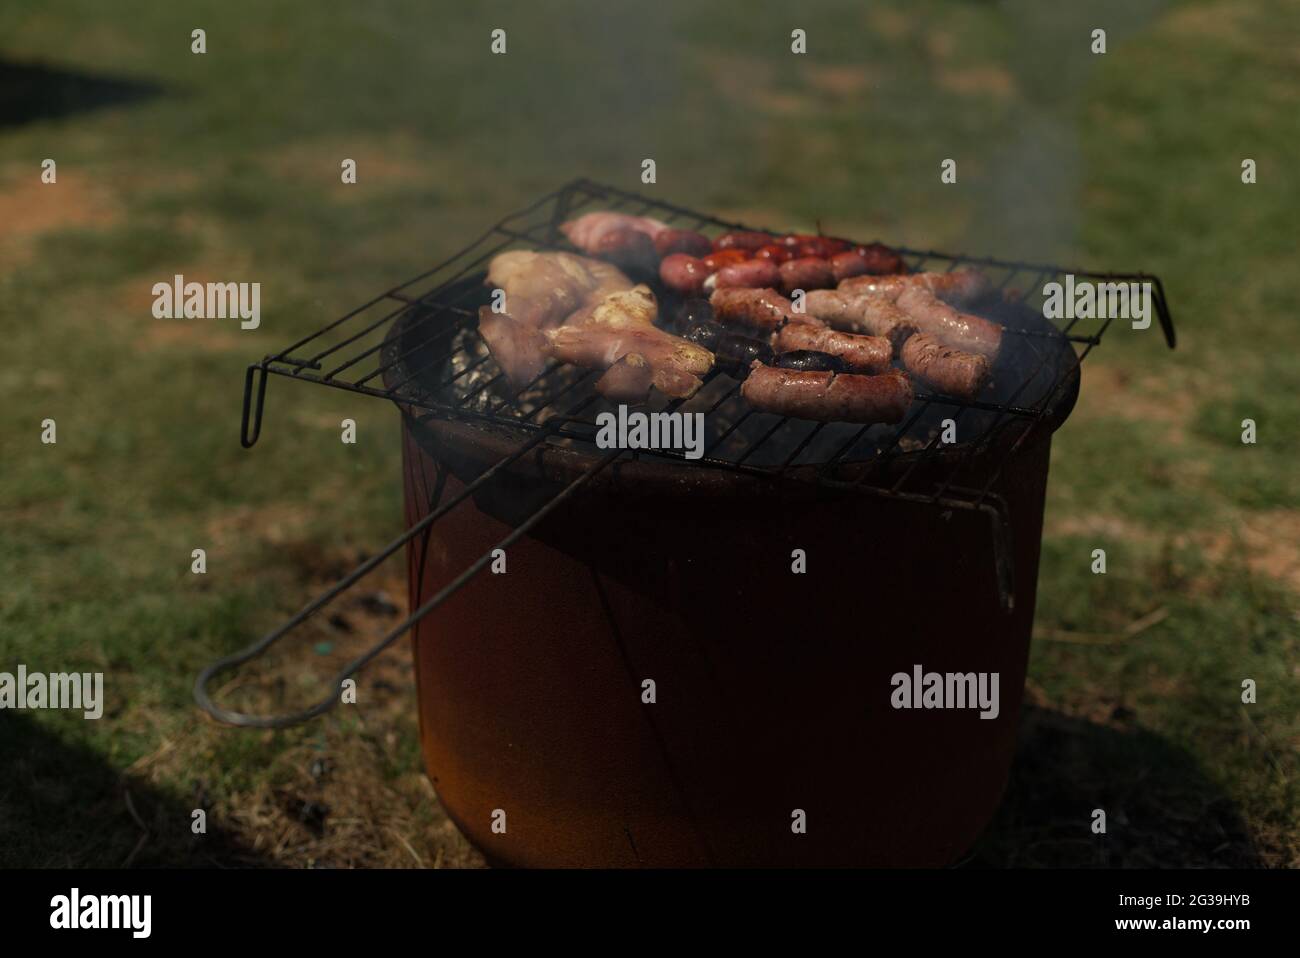 BBQ day in the garden. Stock Photo